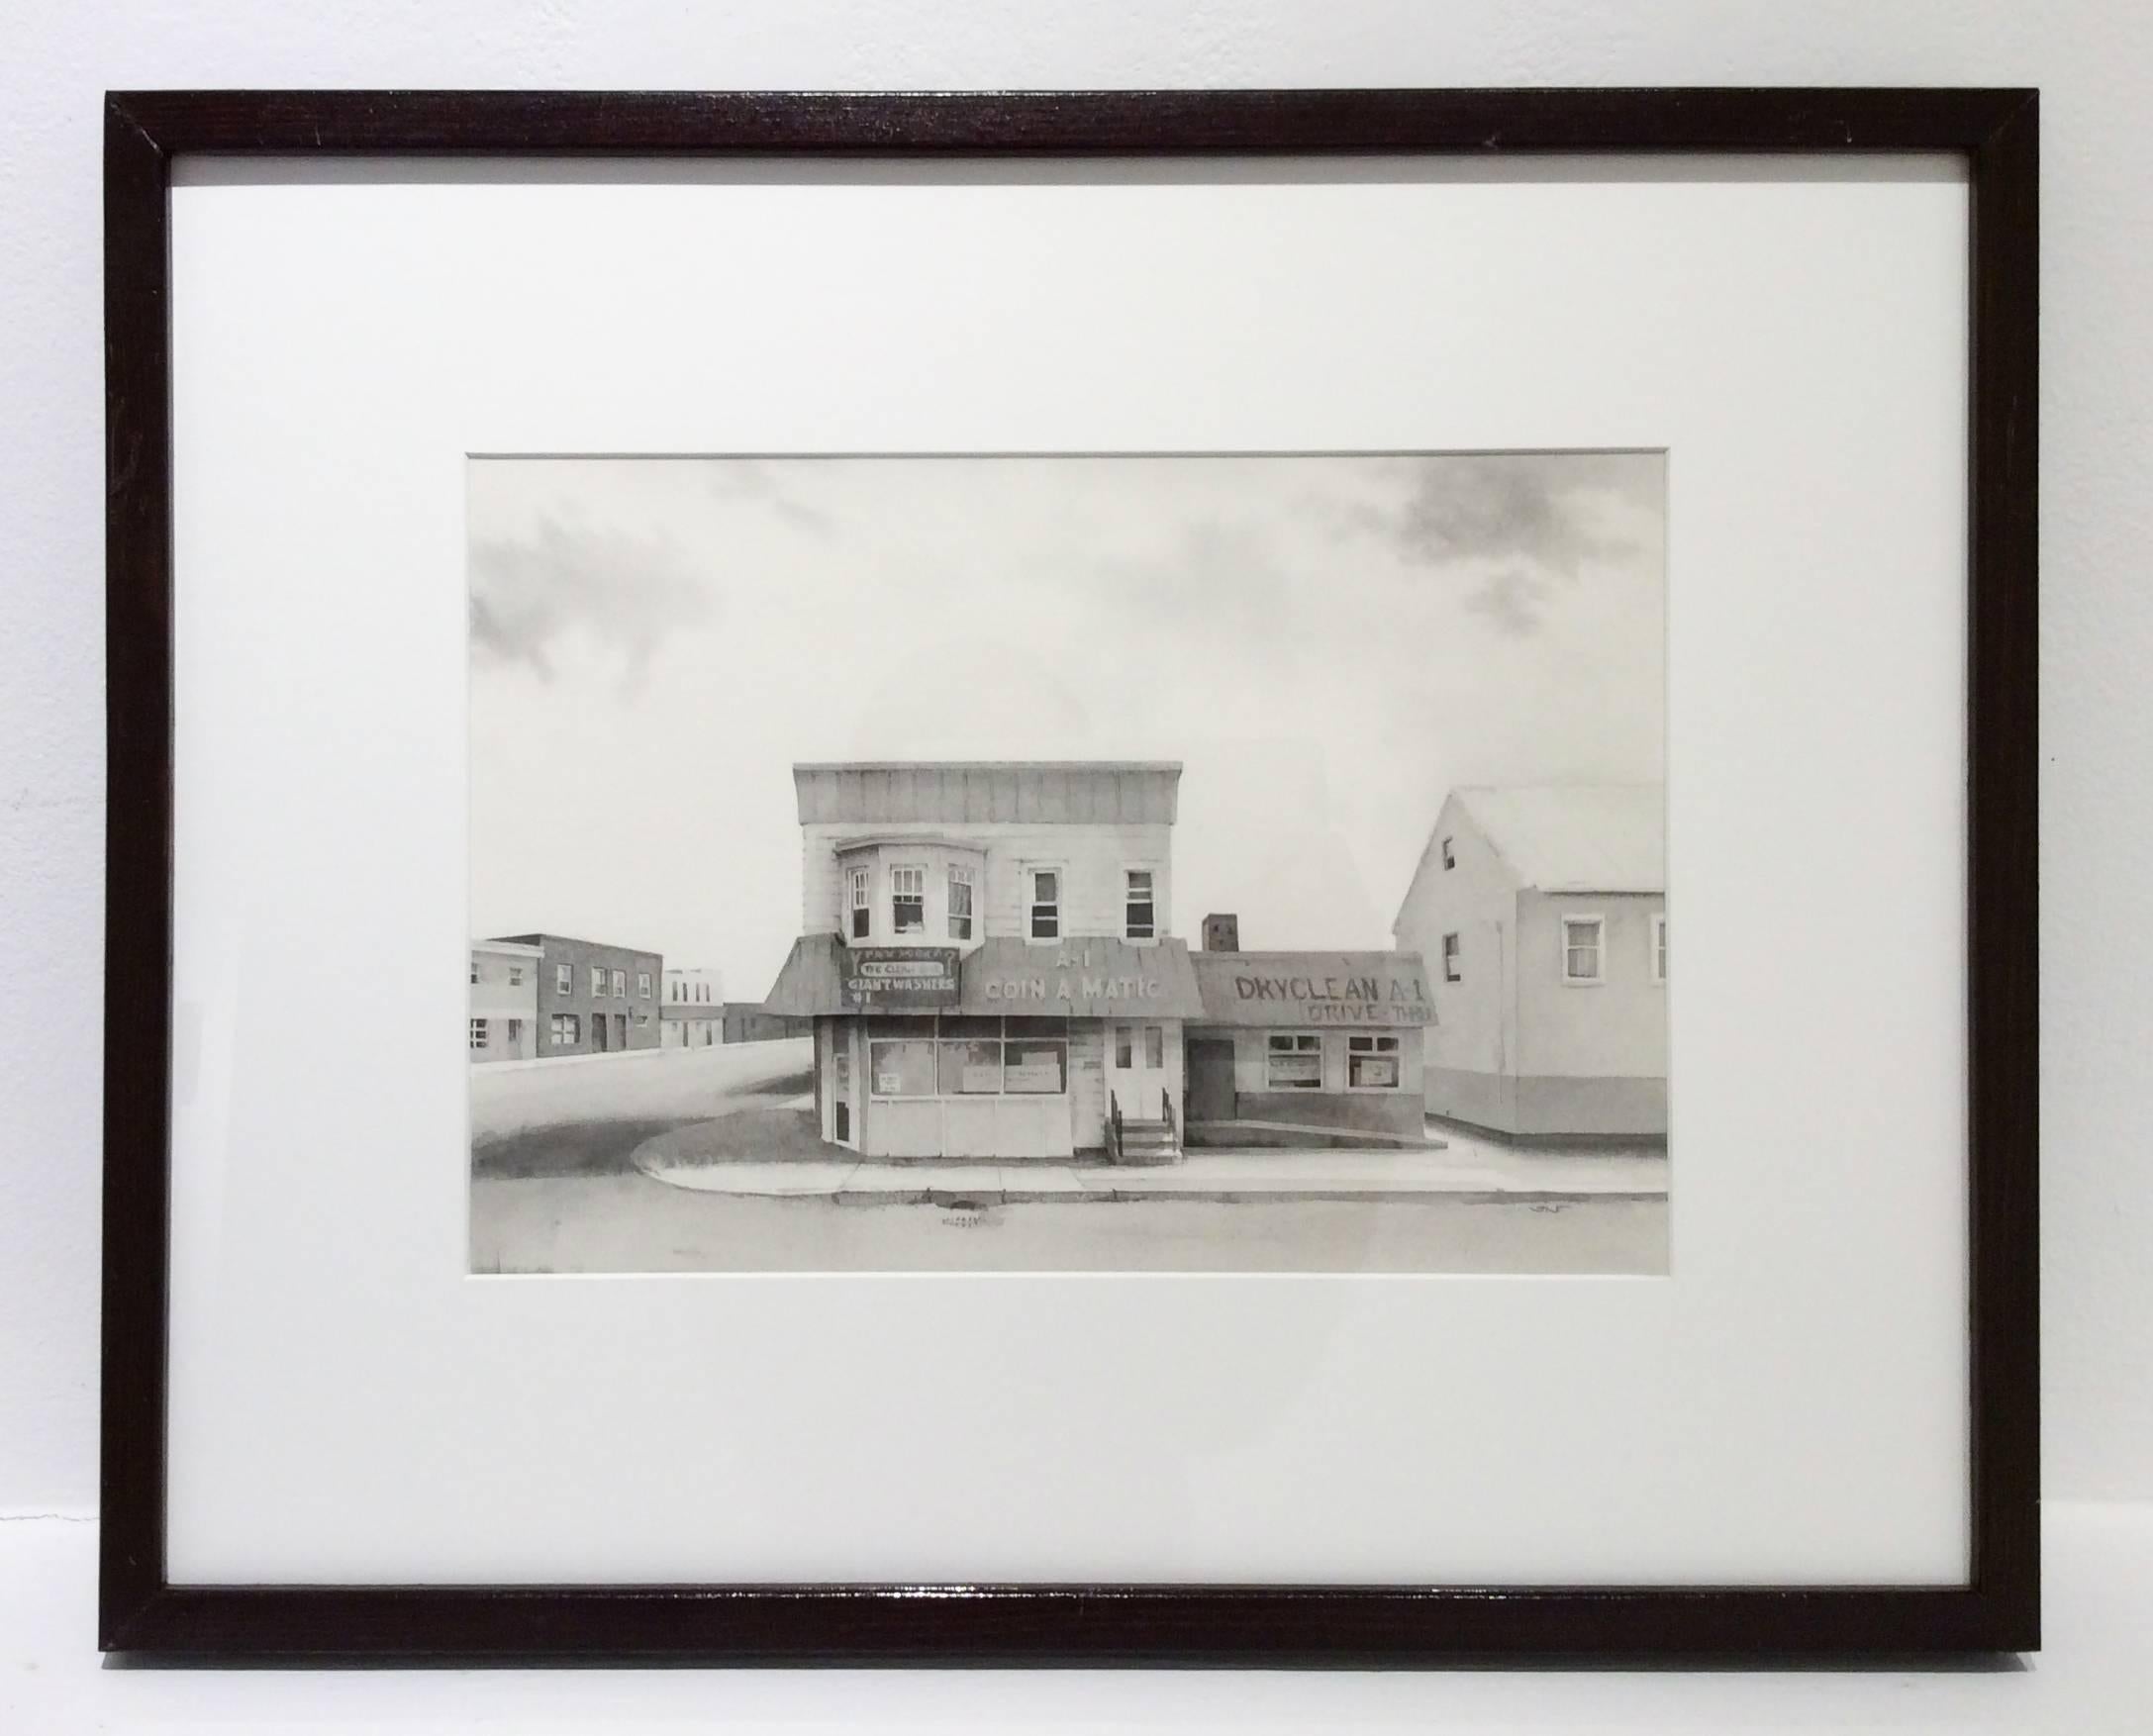 This photo-realist cityscape of a corner laundromat was painted with black and white watercolor by Scott Nelson Foster in 2015. The contemporary cityscape is completed in exquisite detail with close attention paid to perspective, depth, and